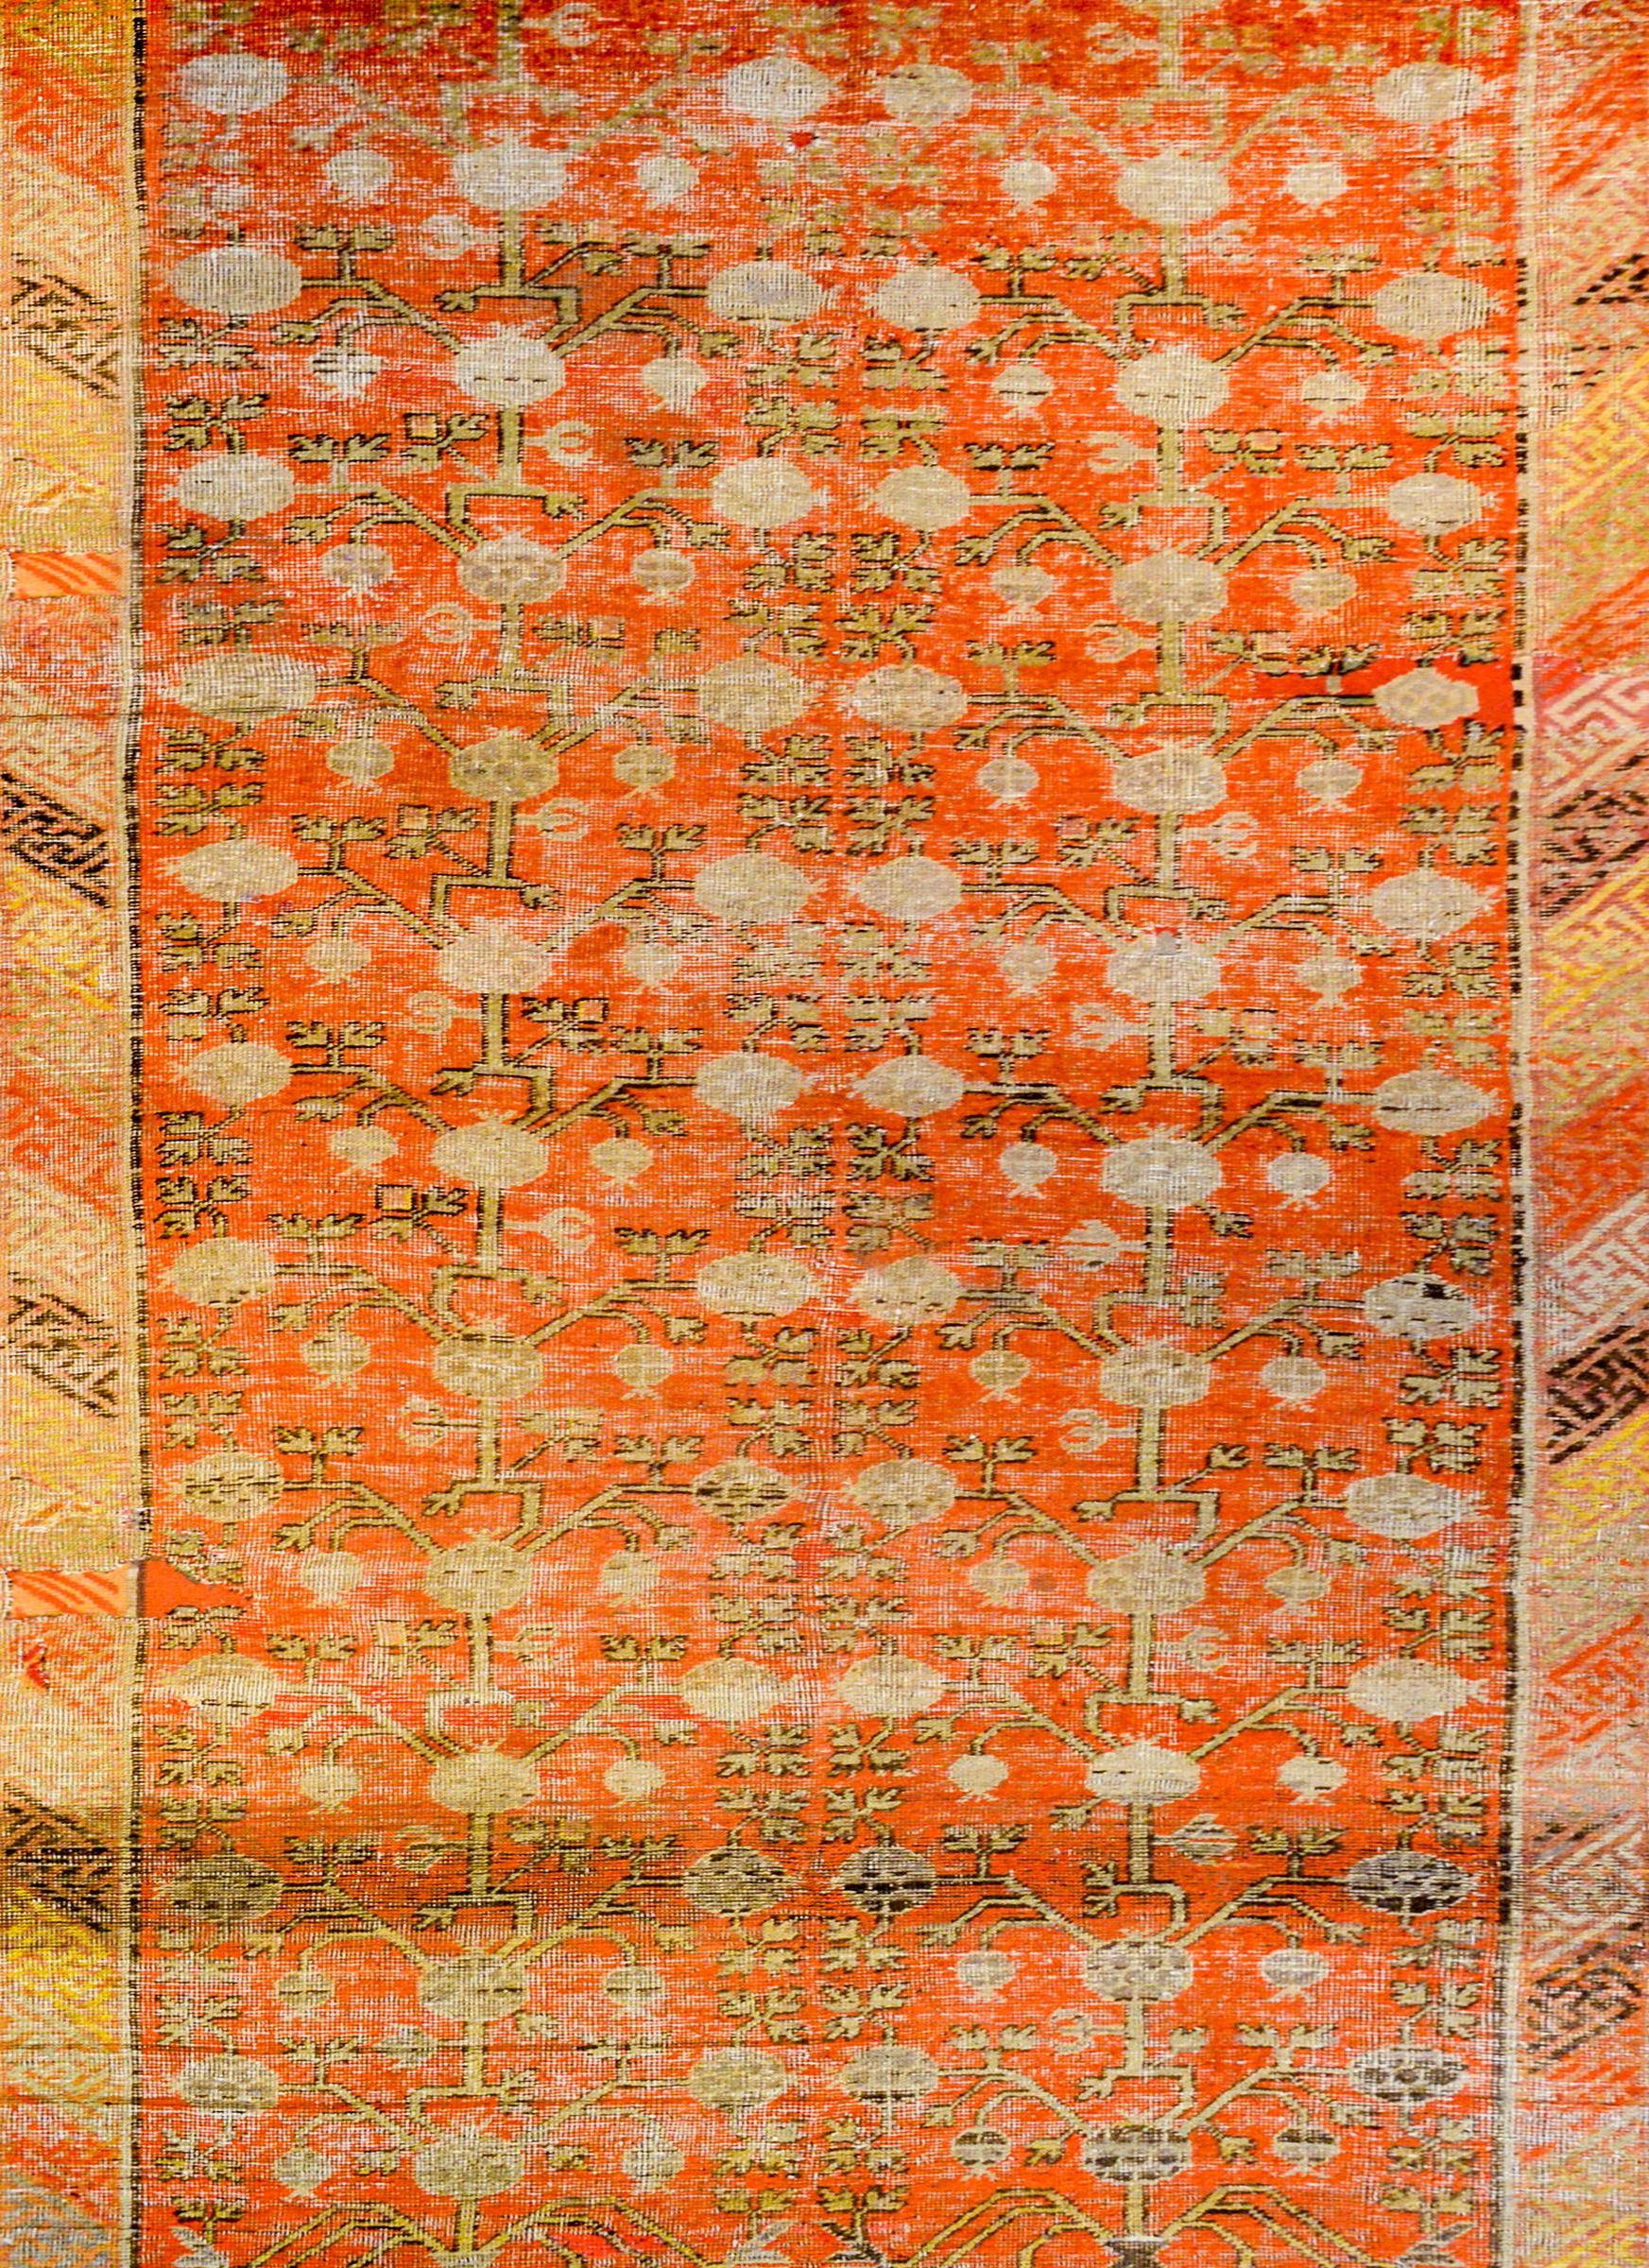 A wonderful early 20th century central Asian Khotan rug with a fantastic trellis pomegranate pattern with gold, brown, and pale indigo vegetable dyed wool on a burnt orange background. The border is beautiful comprised of an inner meandering motif